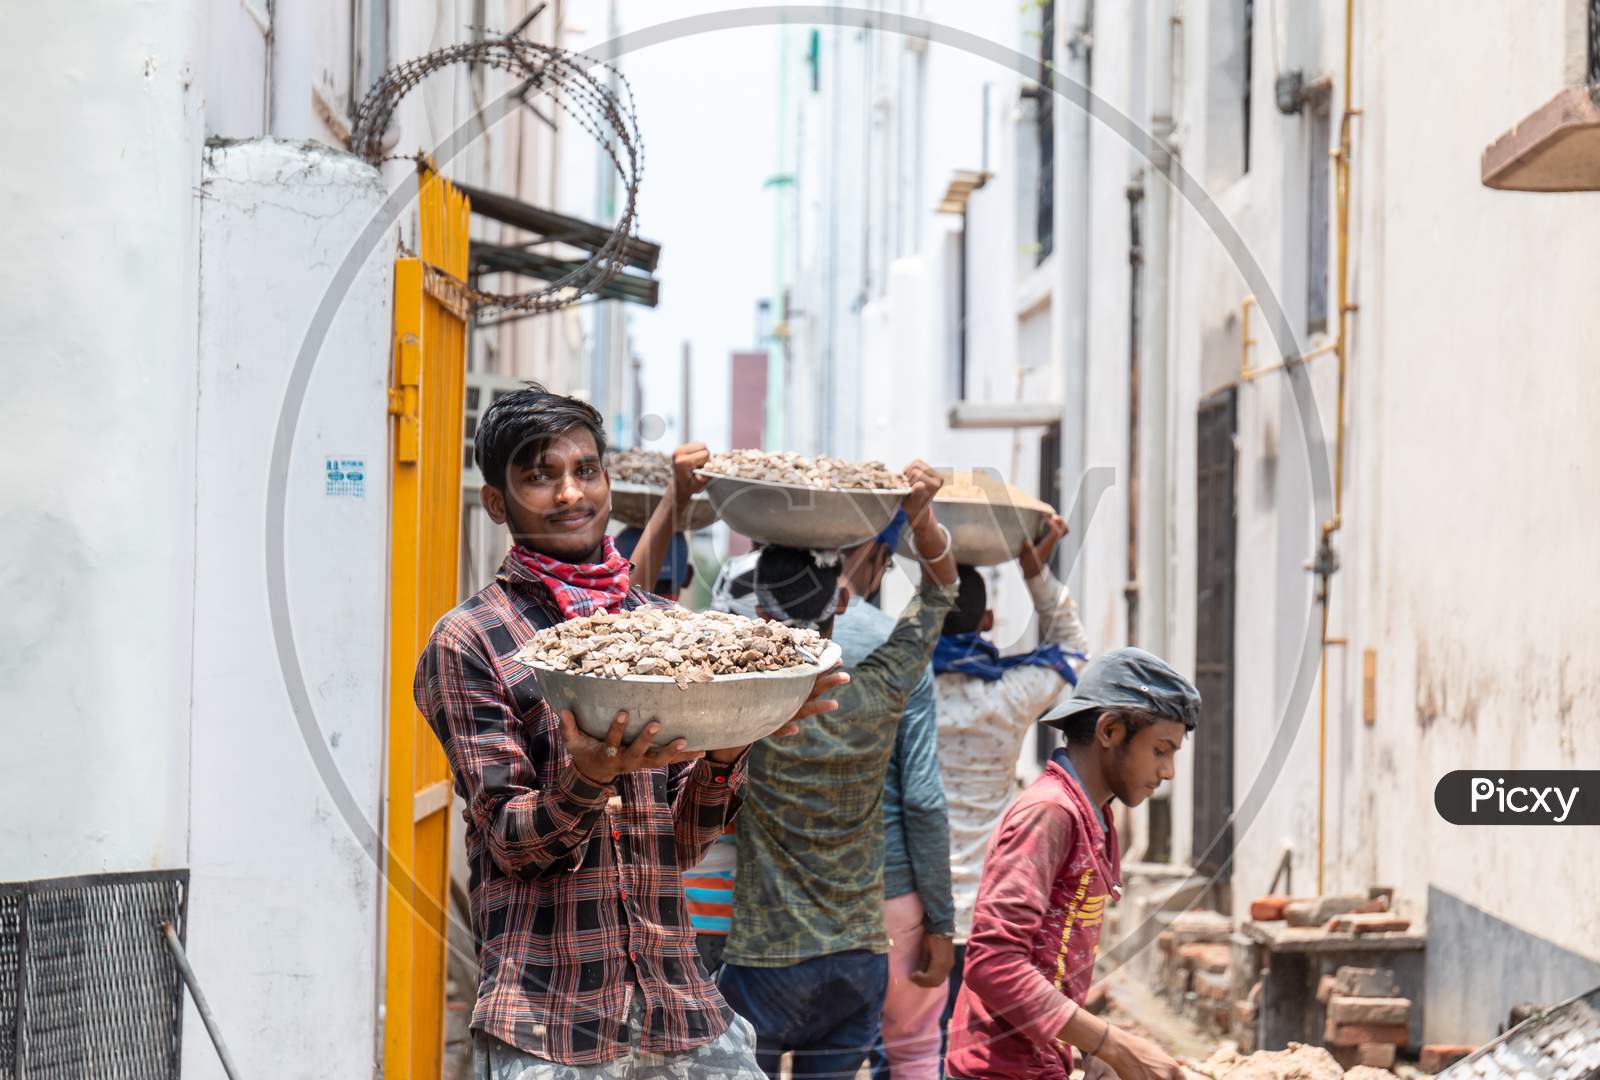 Indian labor with Medical Mask at Construction Site during Unlock down India